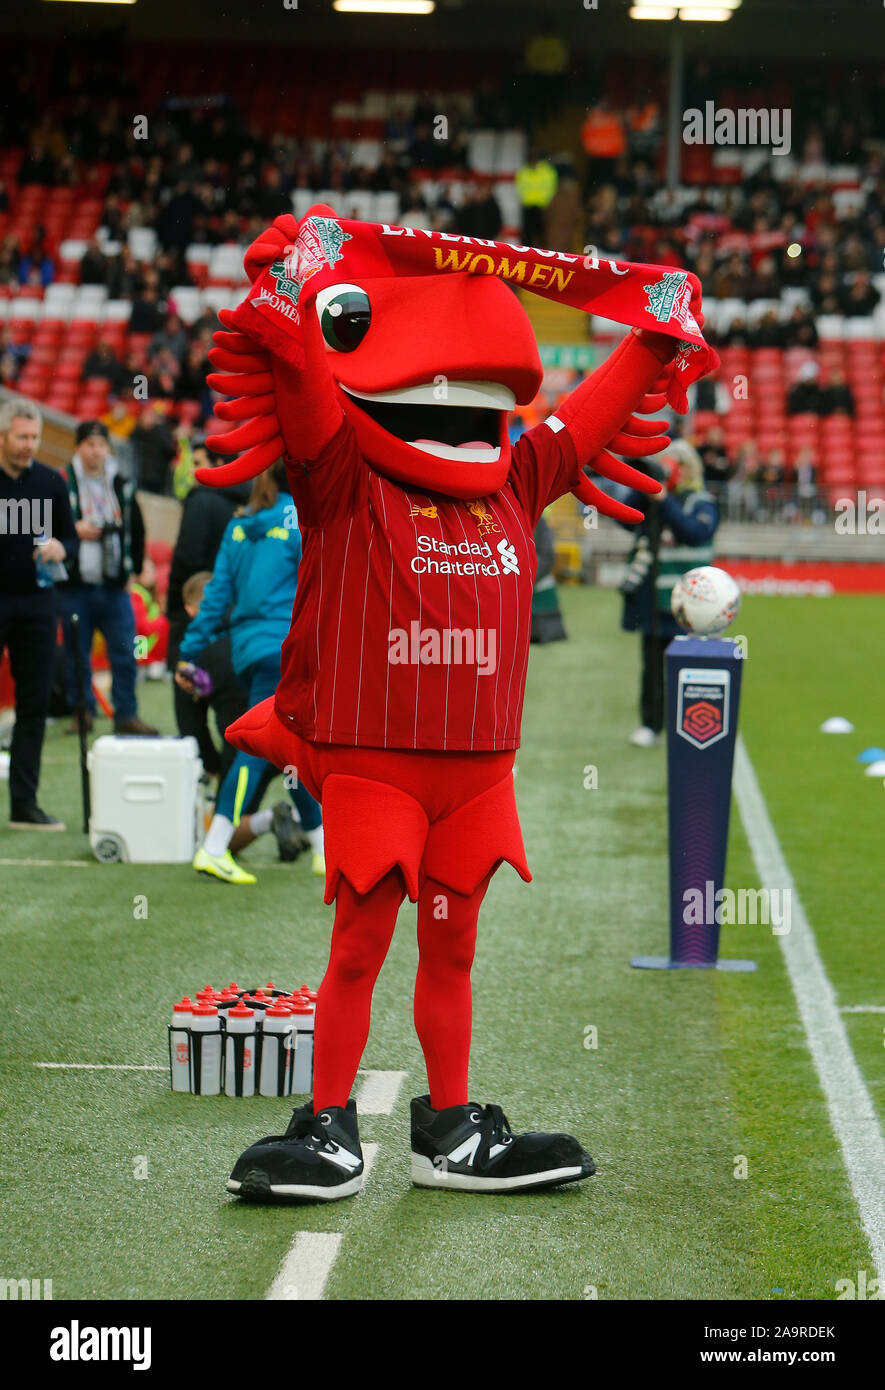 Anfield, Liverpool, Merseyside, UK. 17th Nov, 2019. Womens Super League Footballl, Liverpool Women versus Everton; Liverpool FC mascot Mighty Red before the kick off - Editorial Use Credit: Action Plus Sports/Alamy Live News Stock Photo